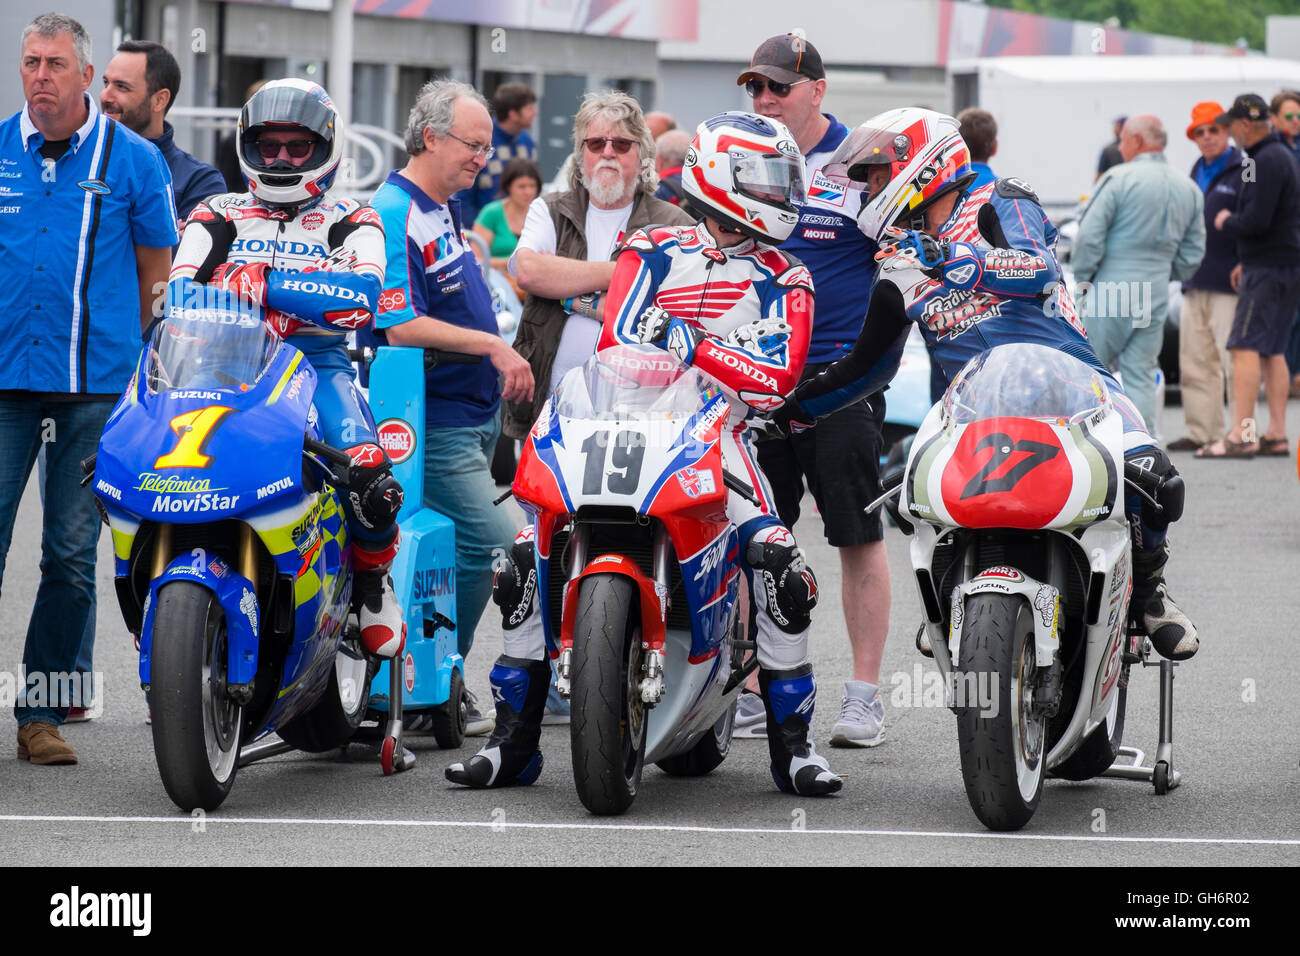 Classic racing motor bikes in the paddock at Silverstone Classic 2016, UK Stock Photo